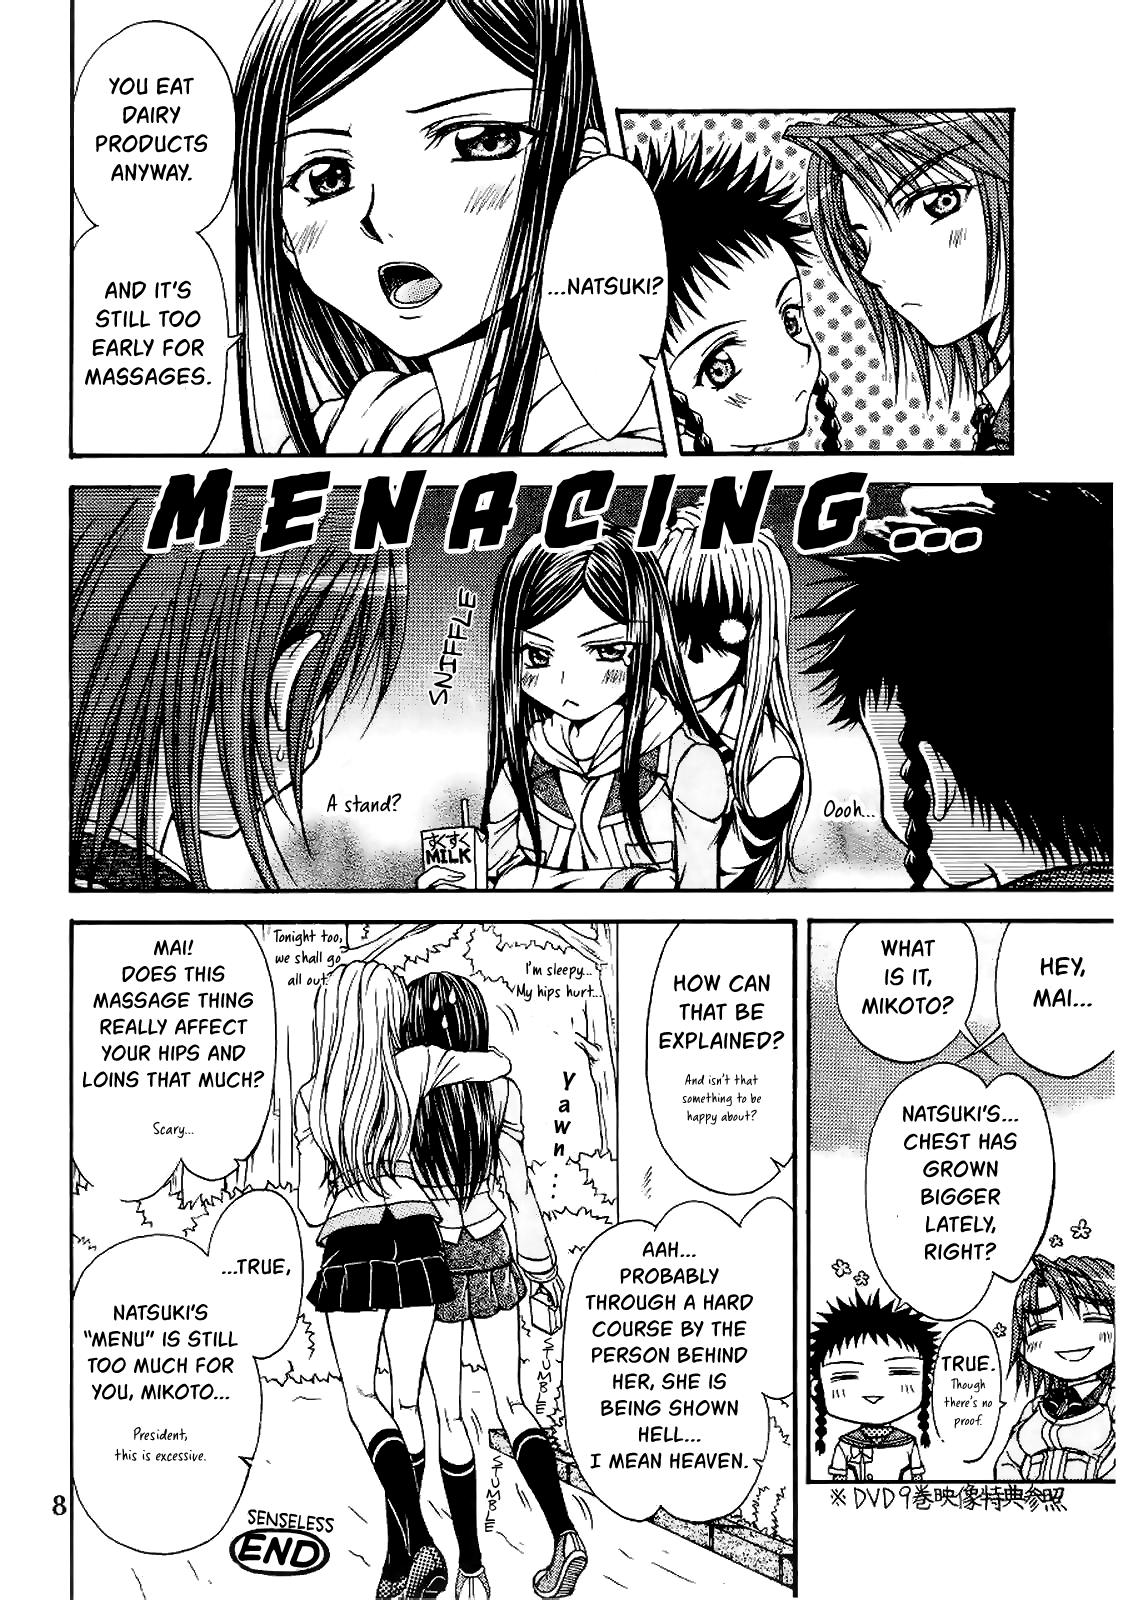 Uncut After School Dolce - Mai hime Thai - Page 8